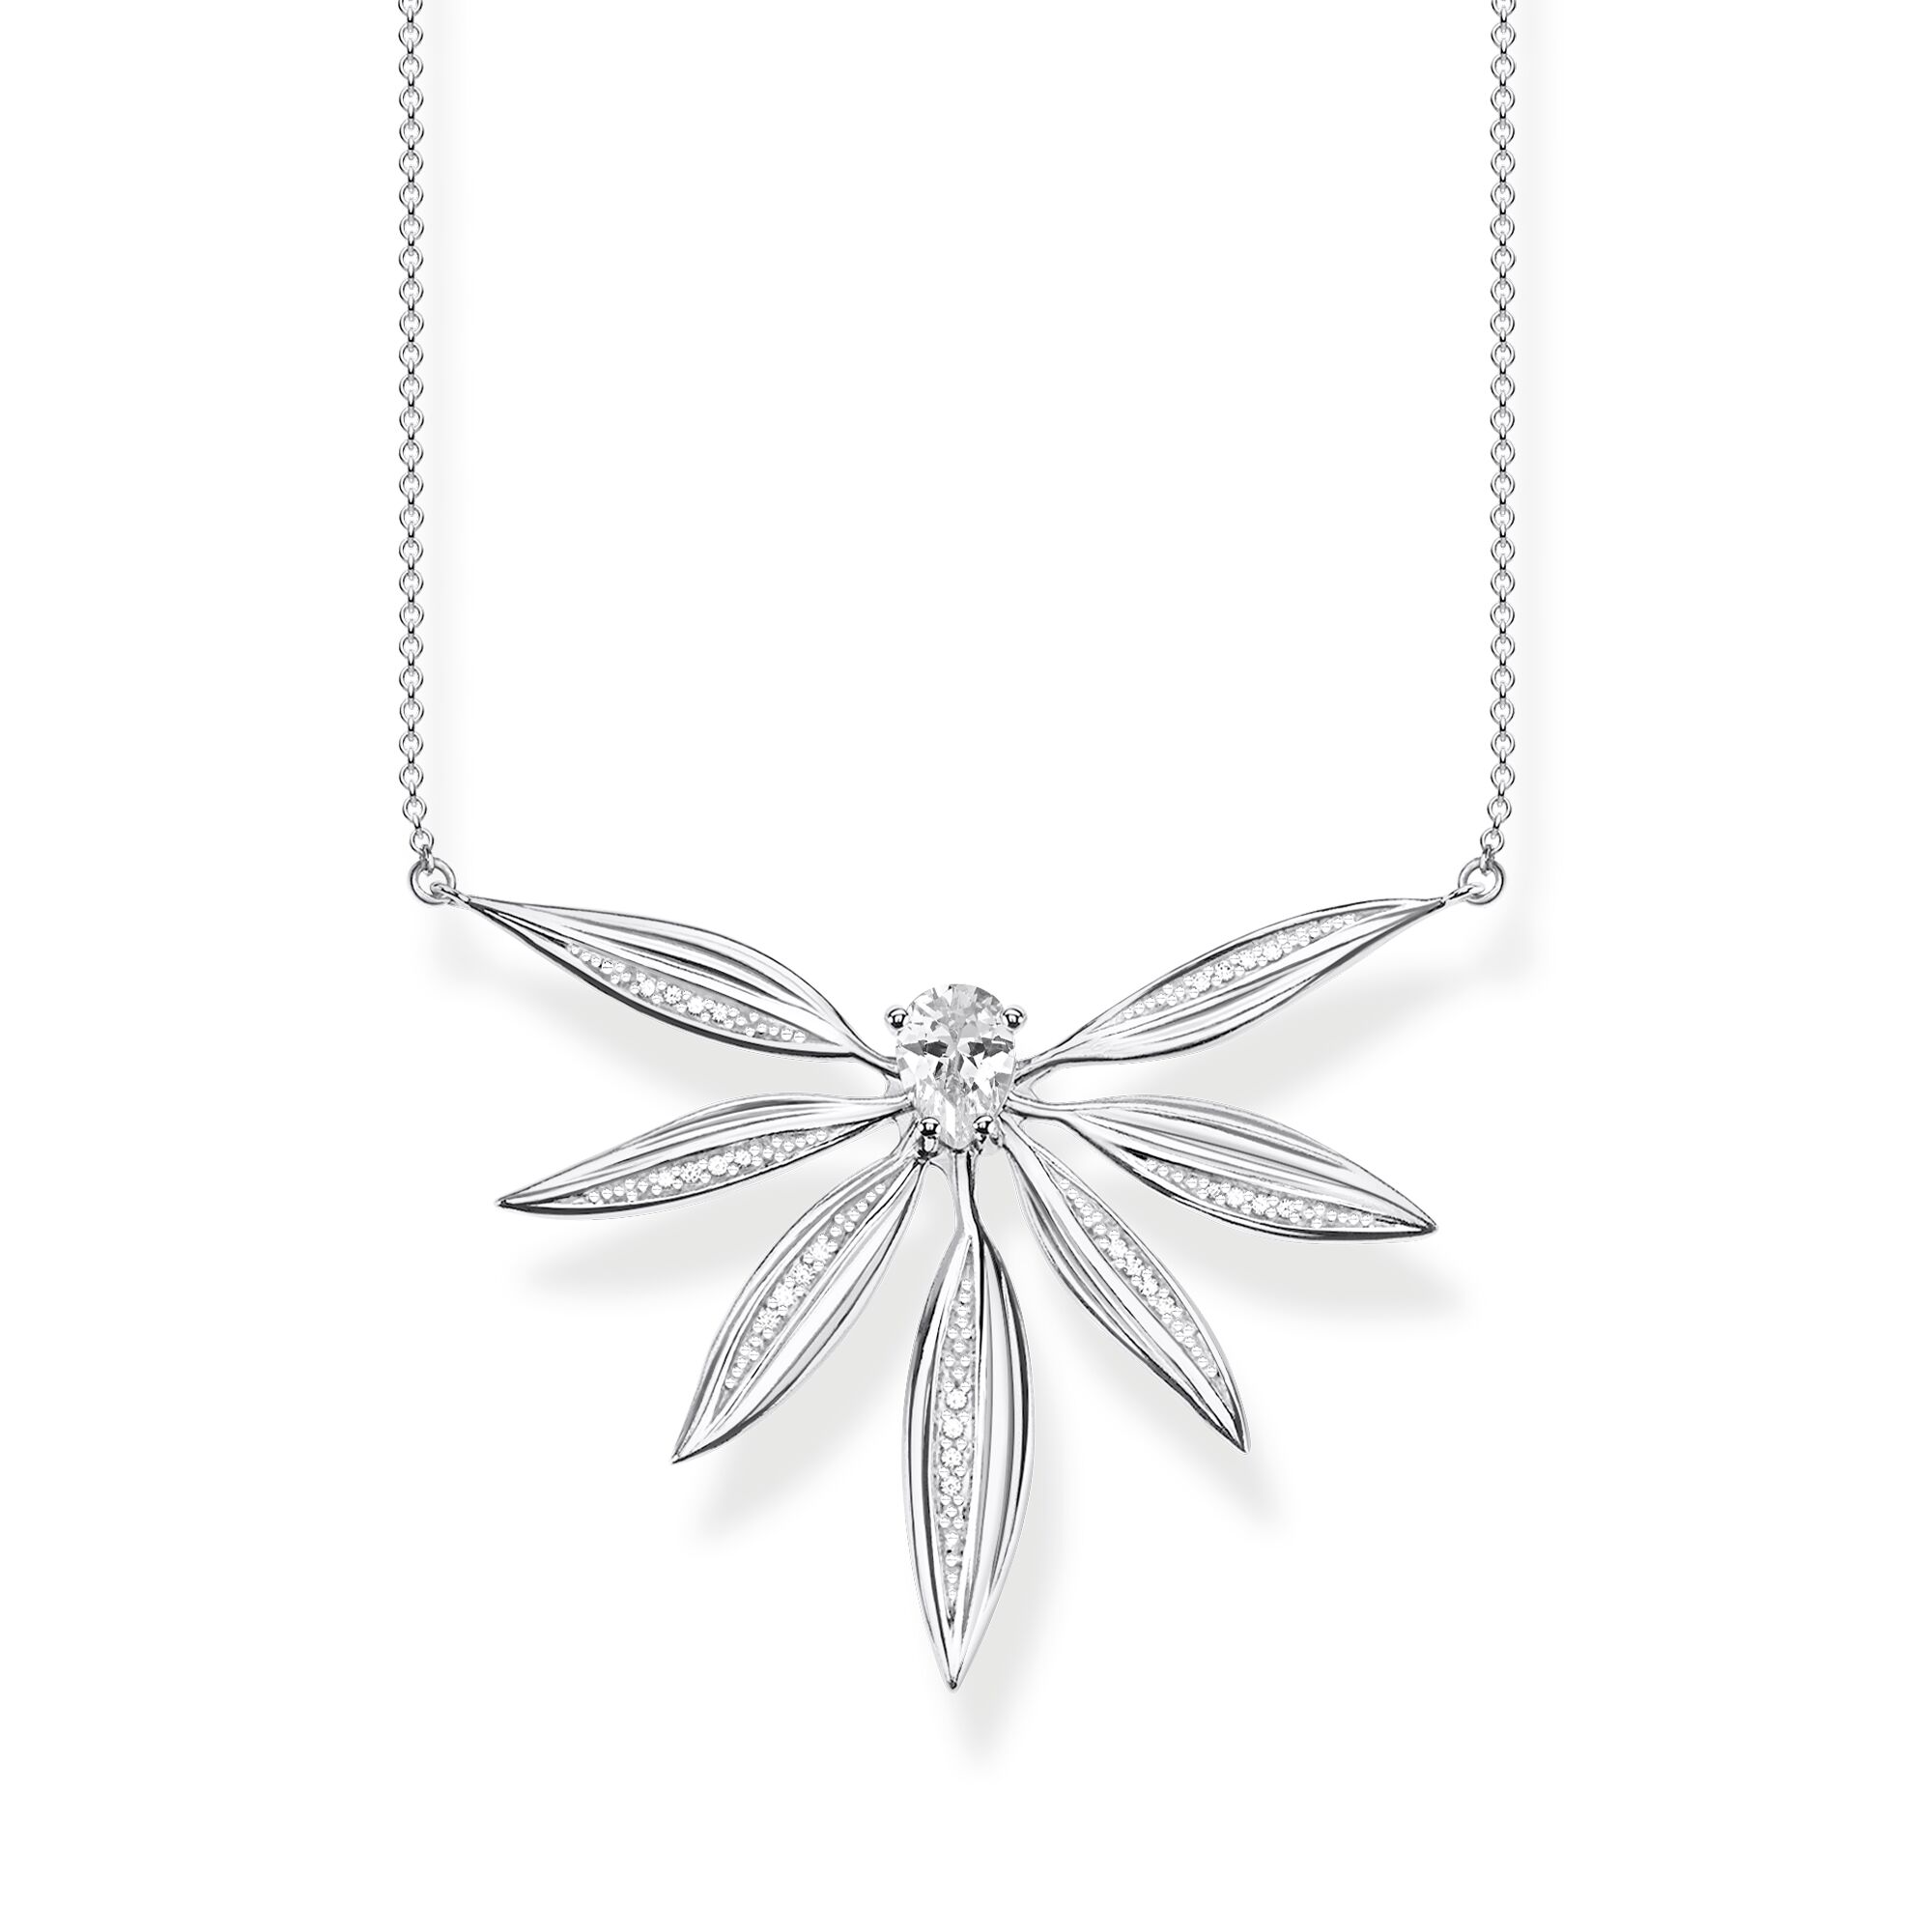 Wholesale Custom made OEM/ODM Jewelry necklace for women in 925 Sterling silver with large leaf pendant OEM